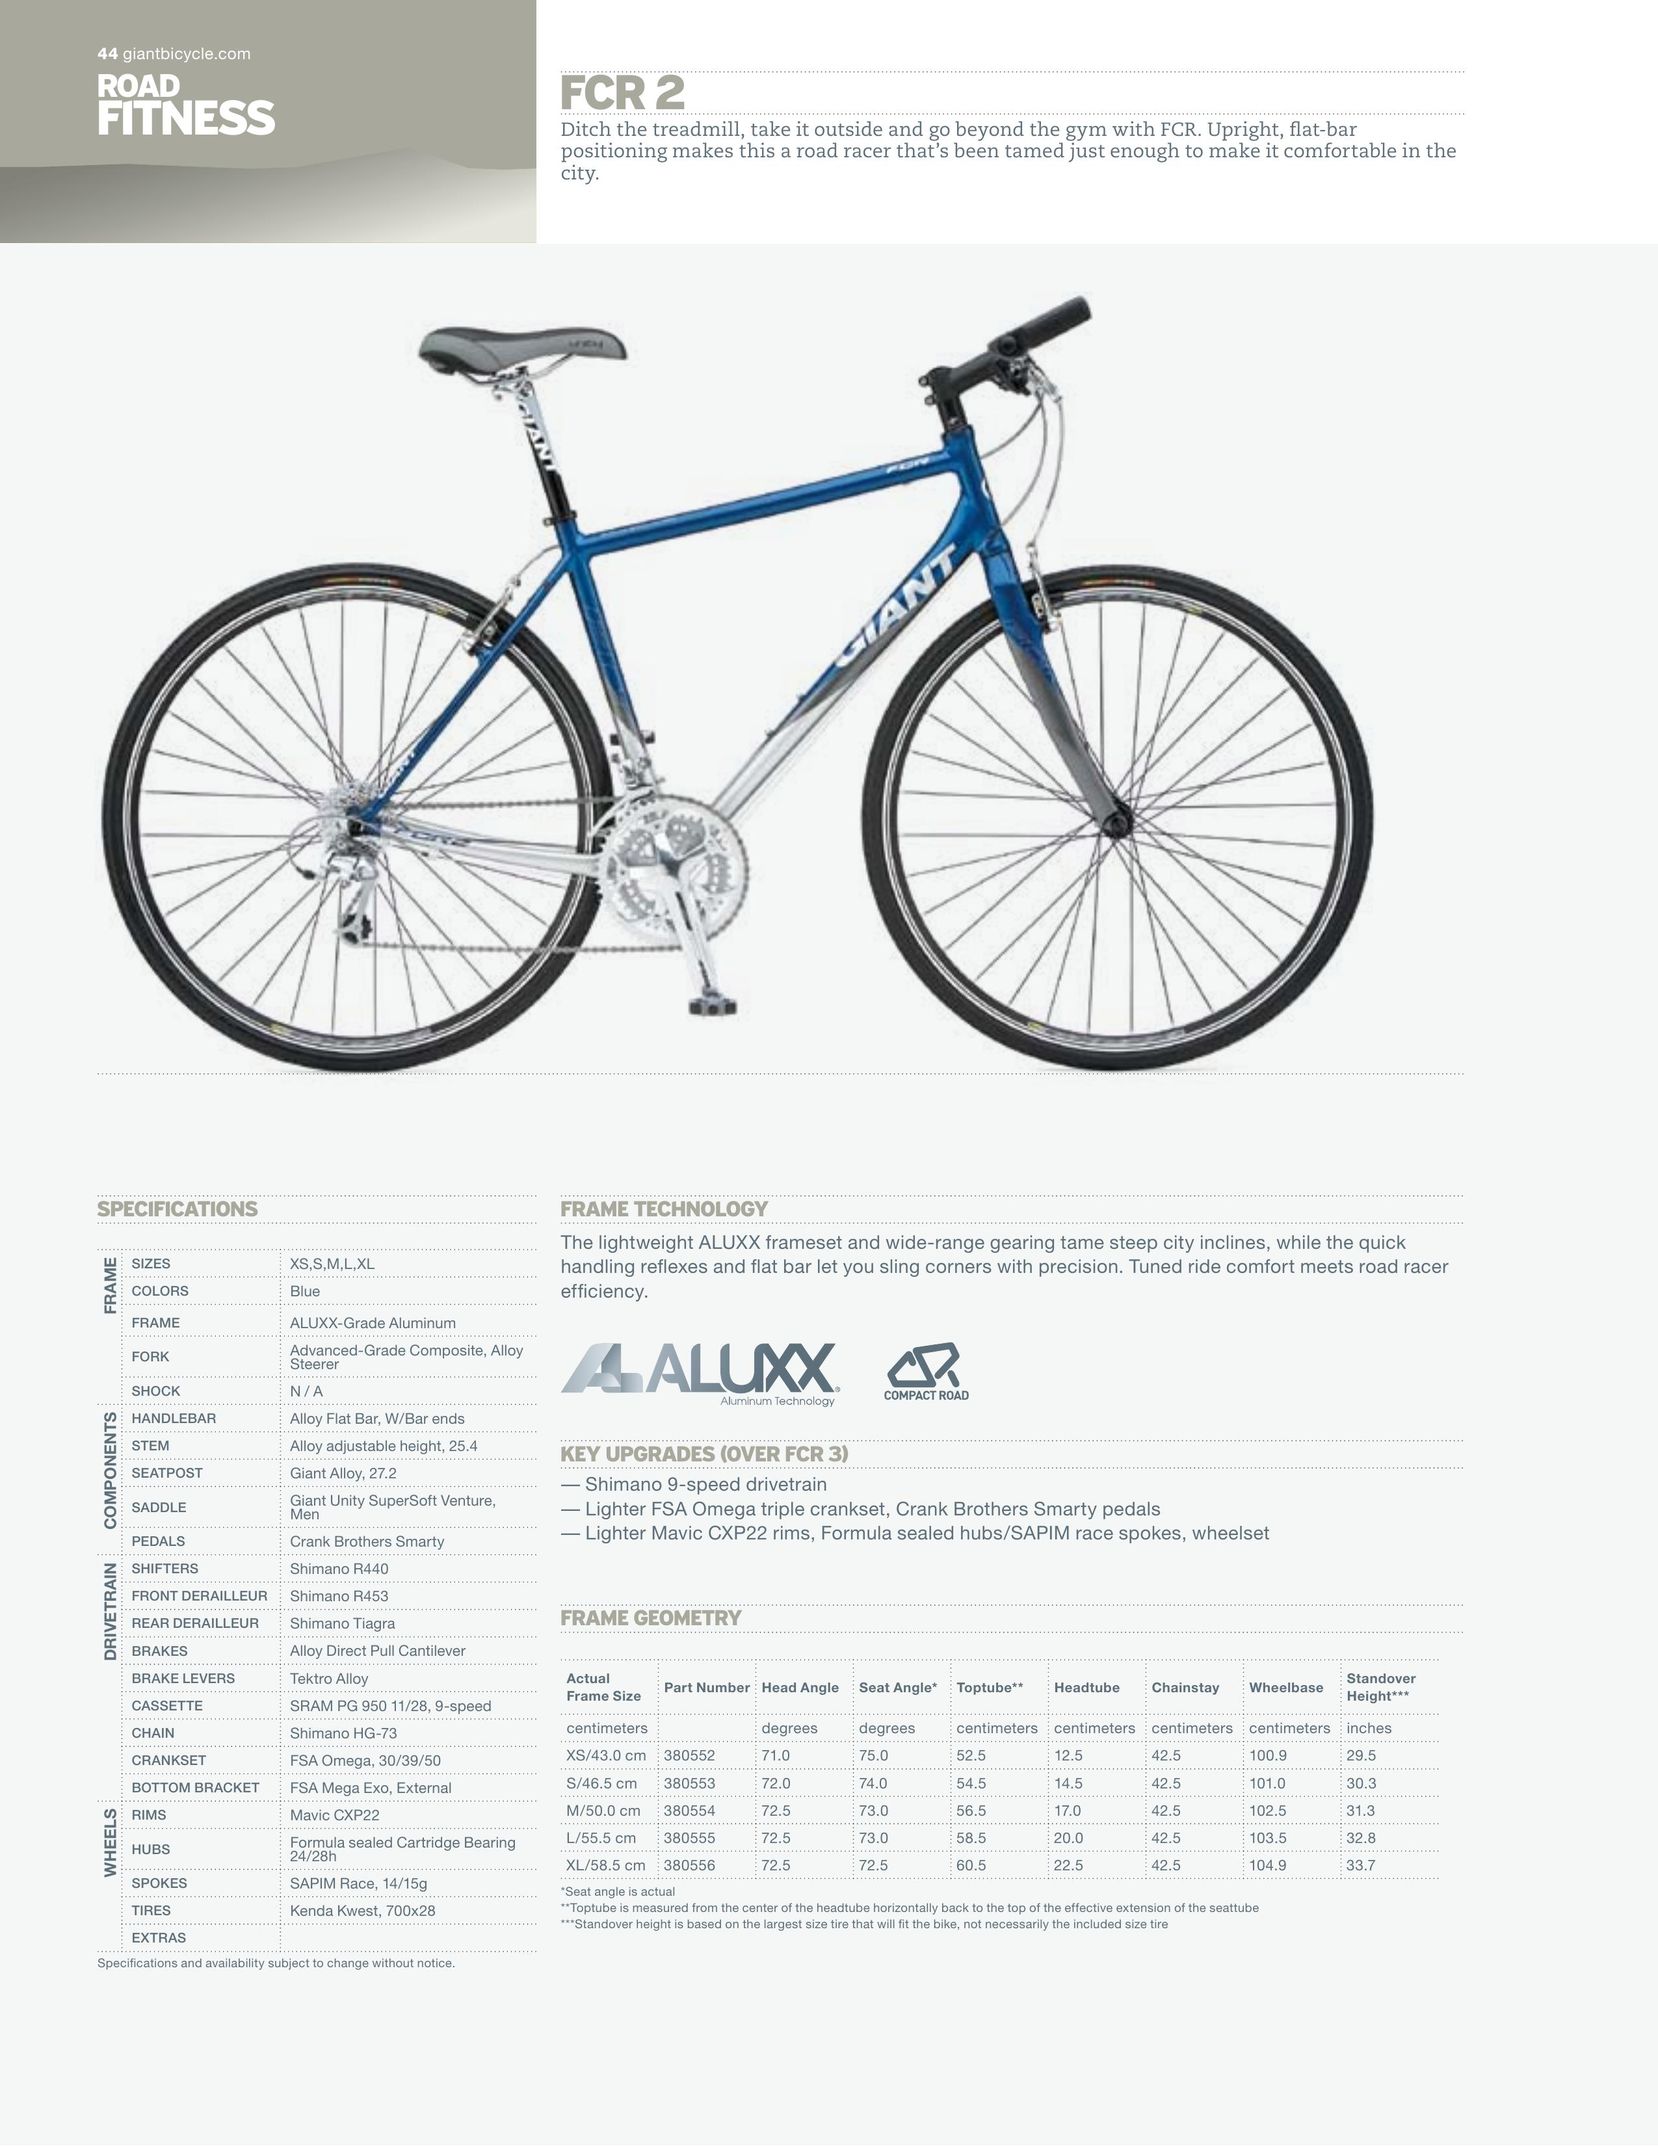 Giant FCR 2 Bicycle User Manual